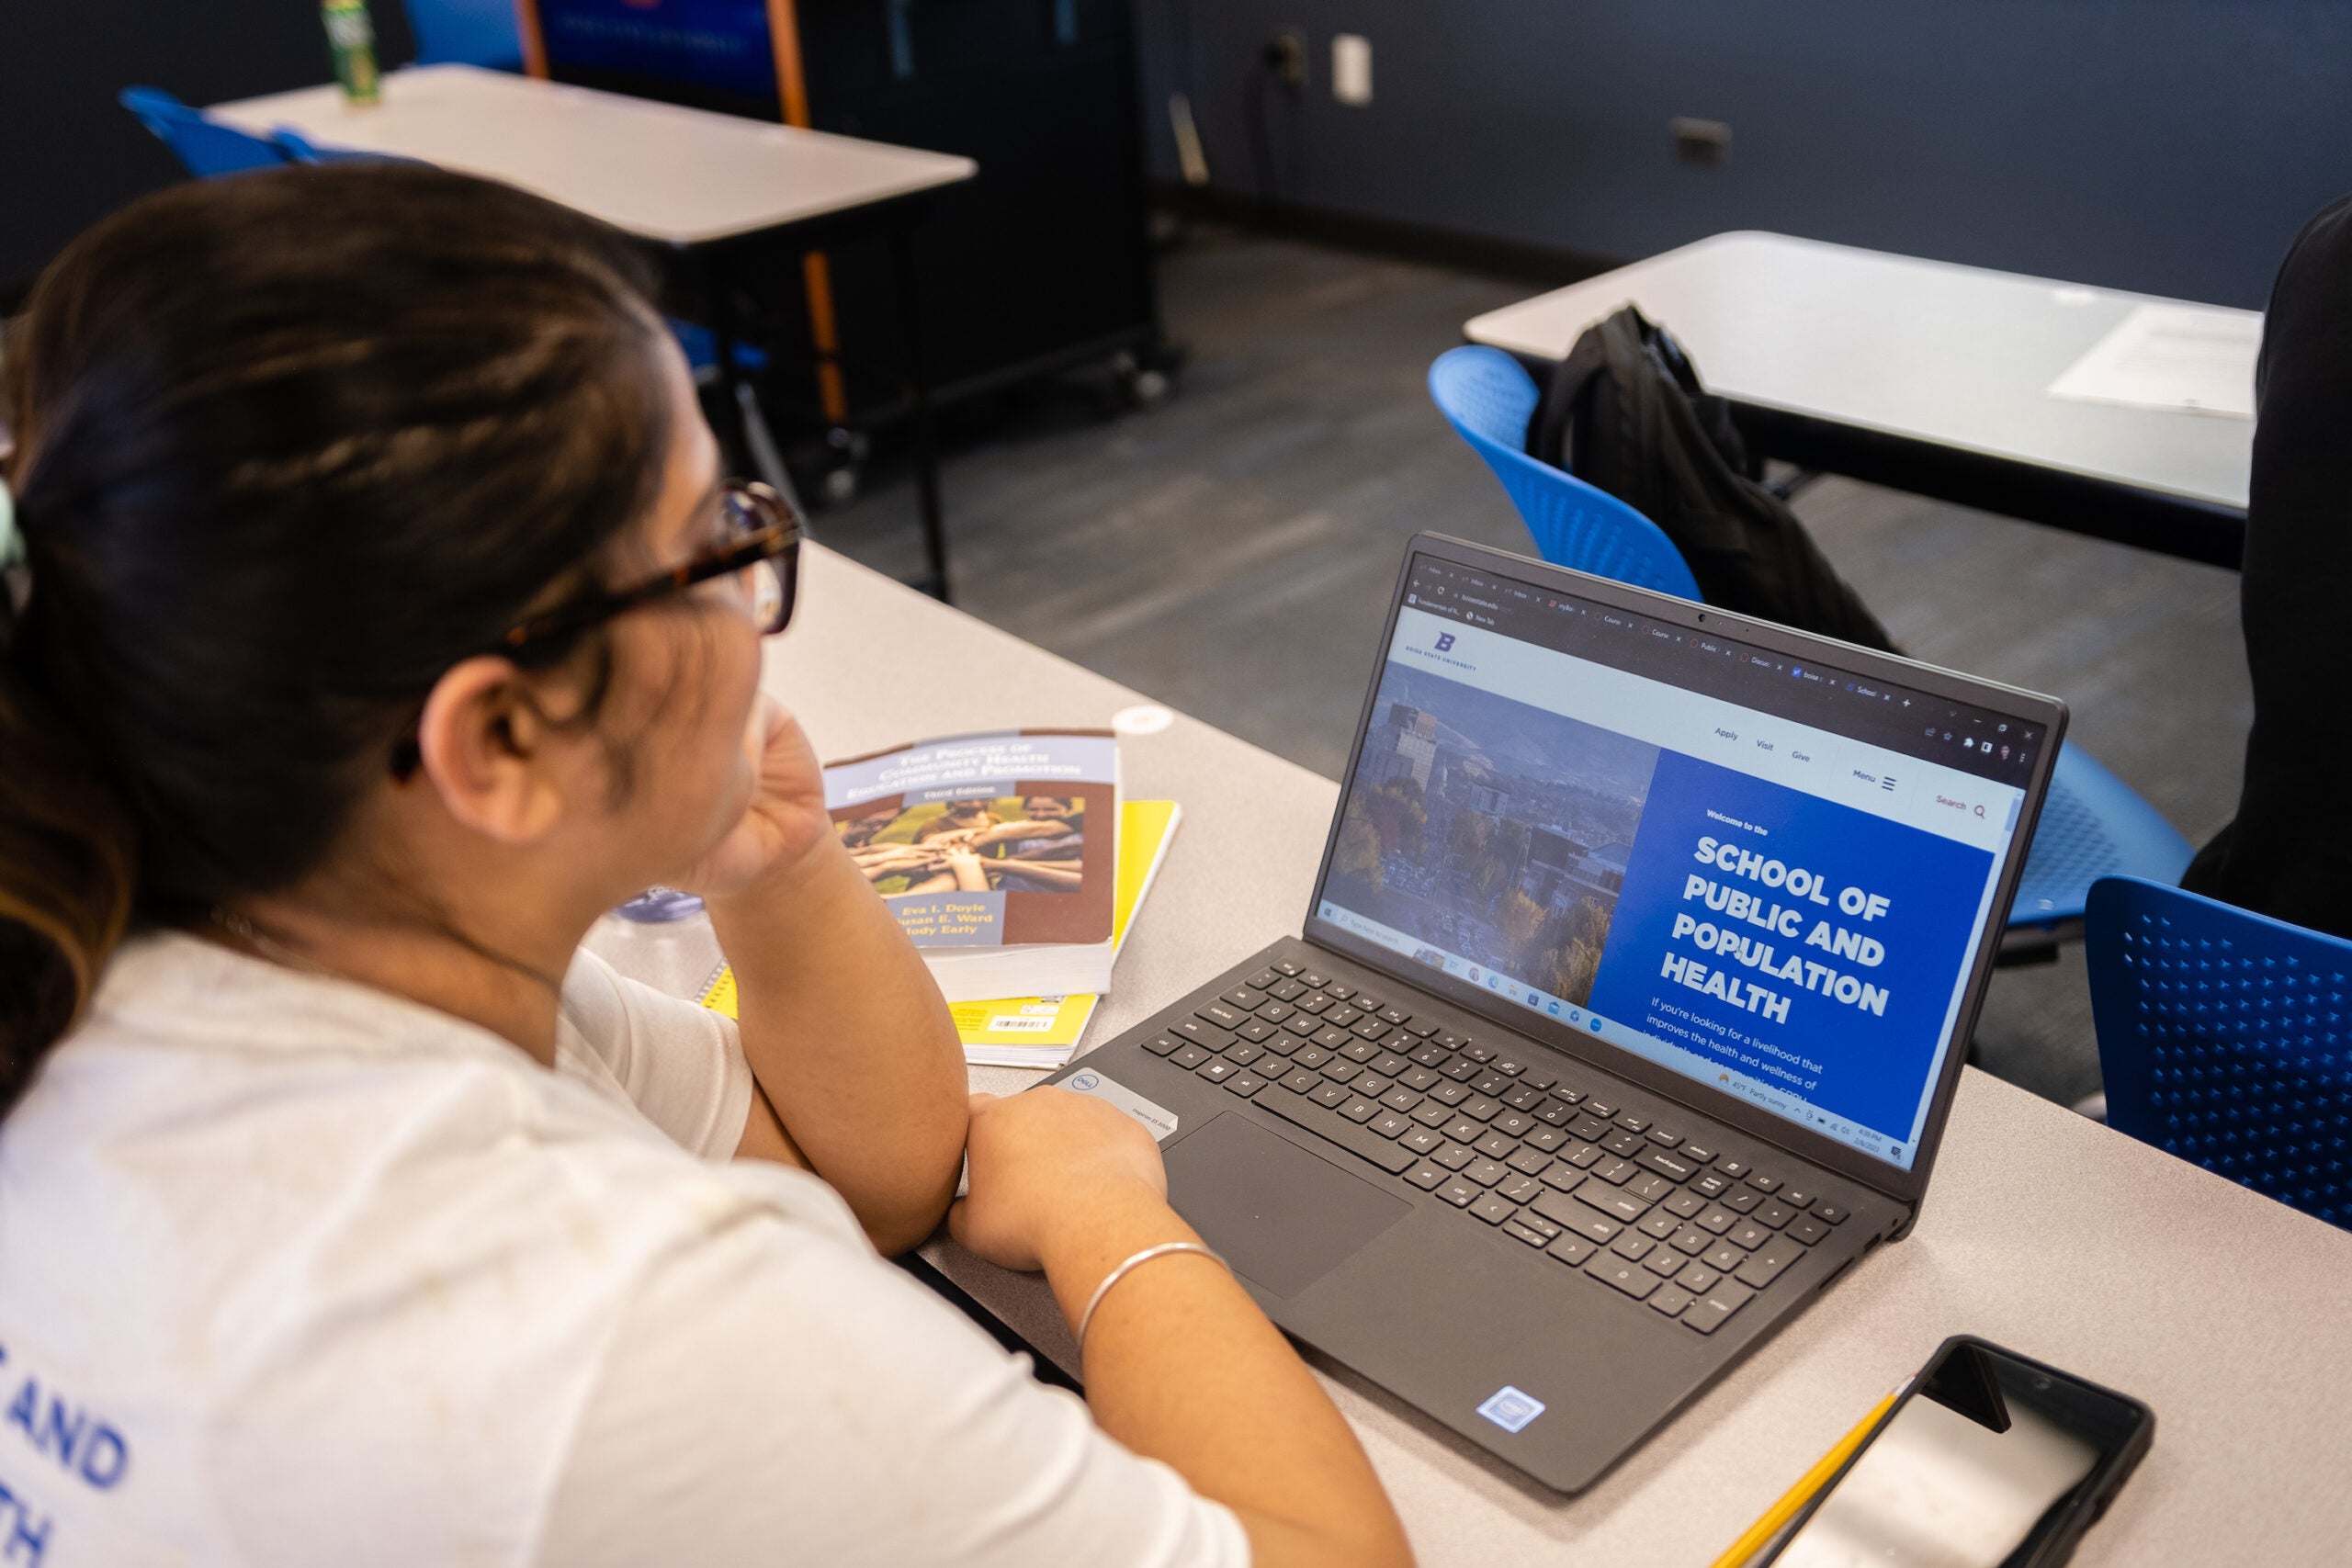 Student in classroom looks at a laptop with the School of Public and Population Health website on its screen.